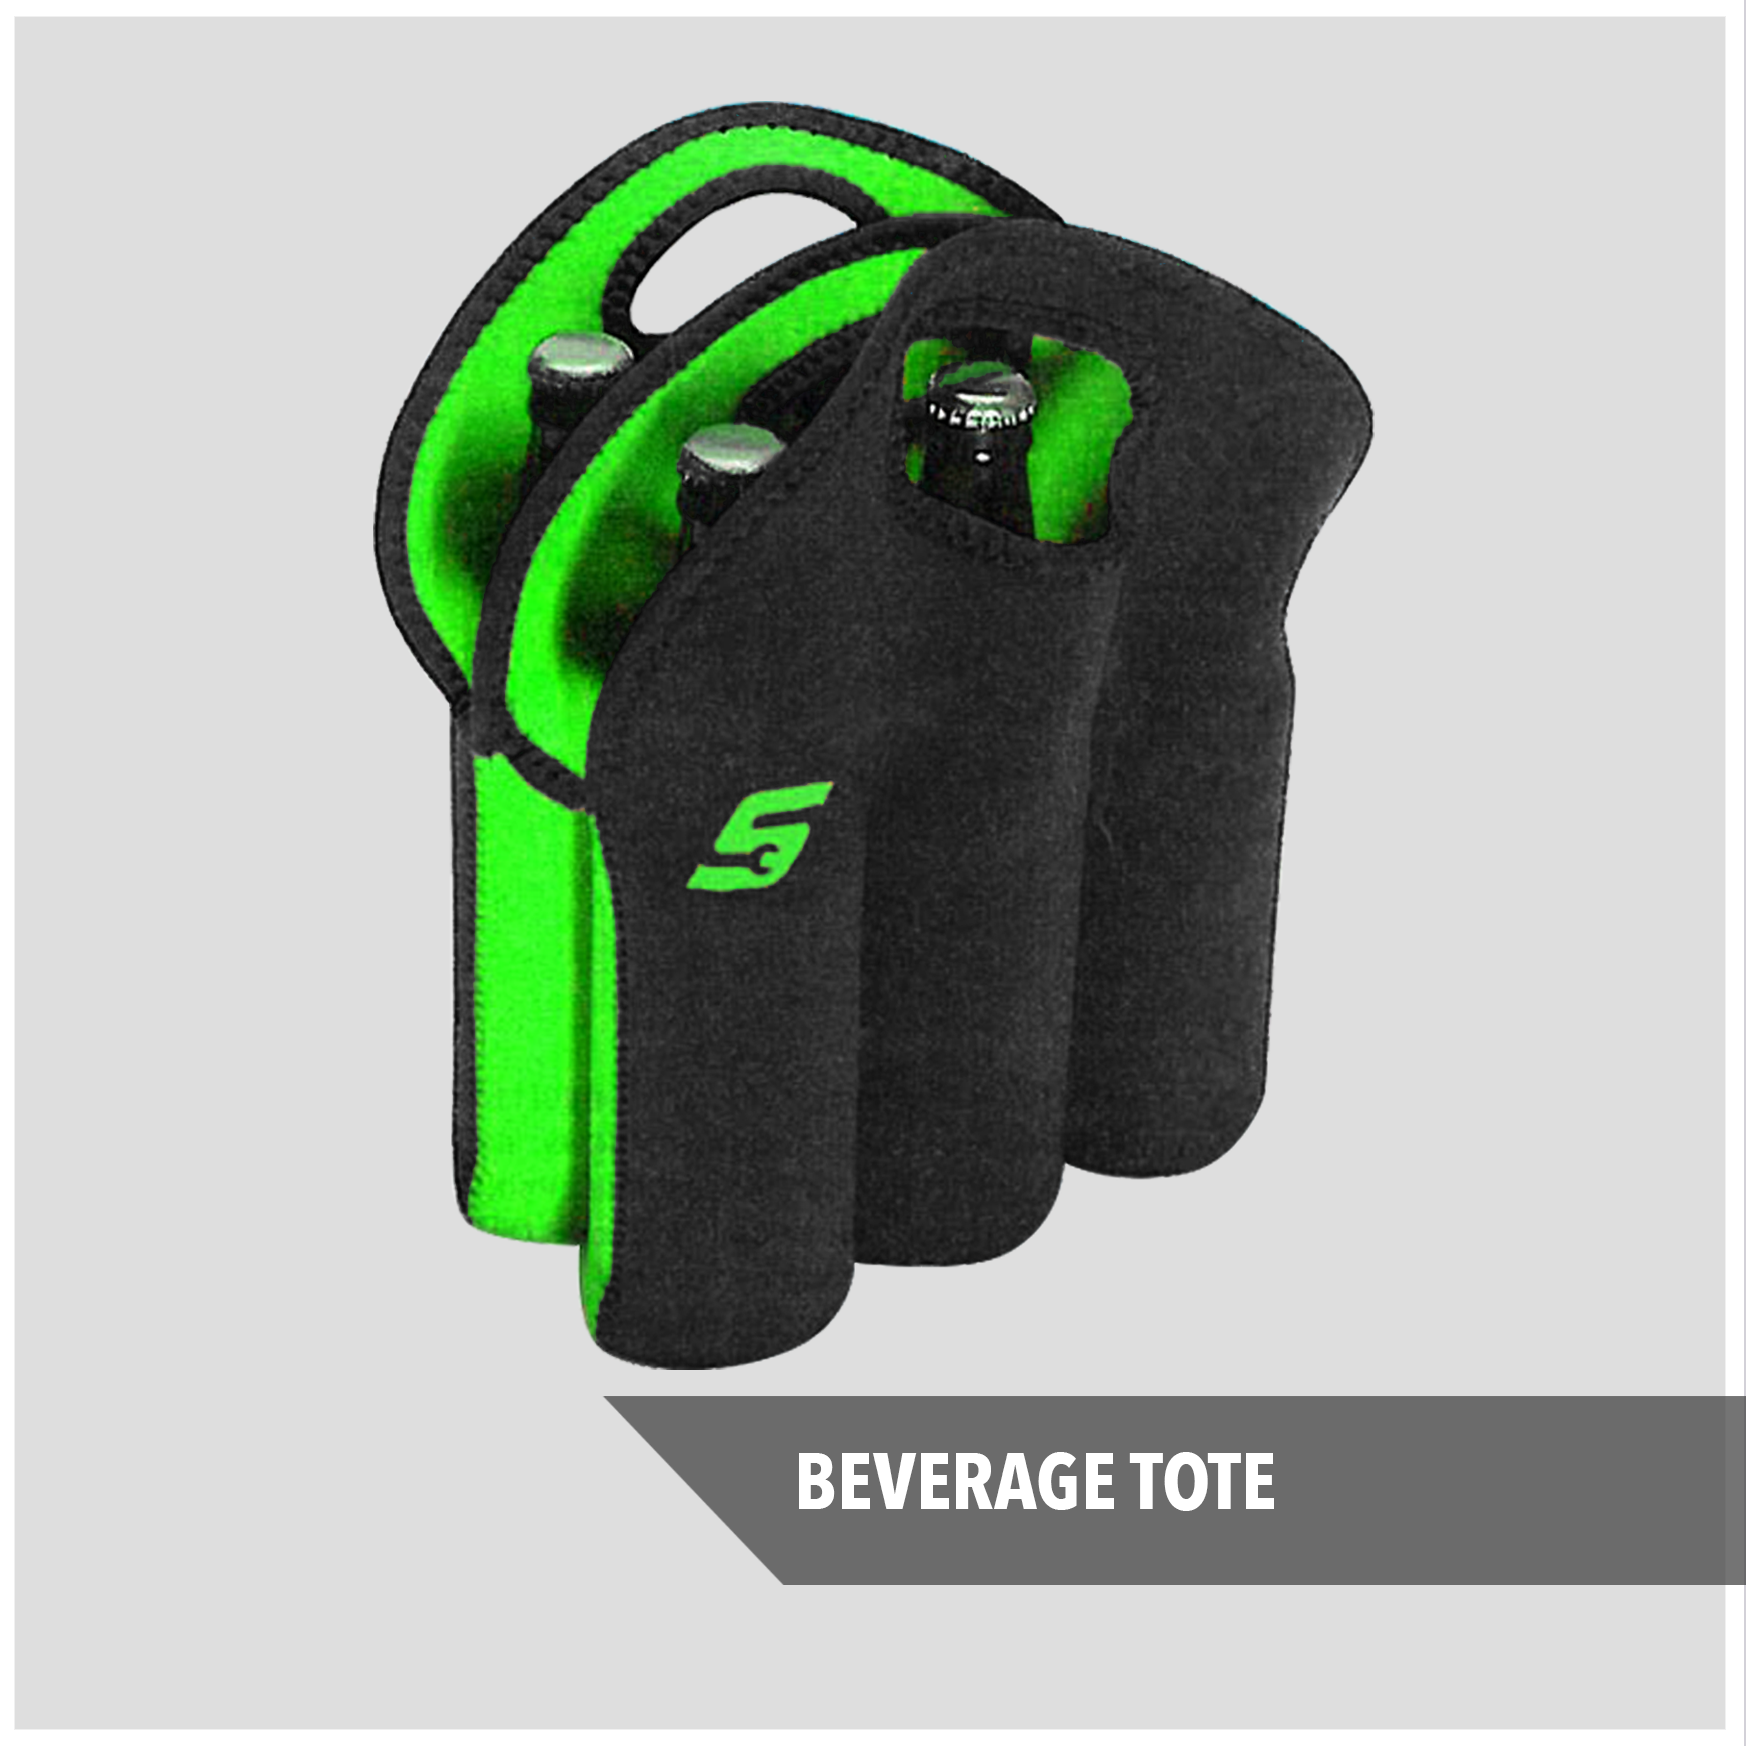 CP_FEATURED_BEVERAGETOTE.png